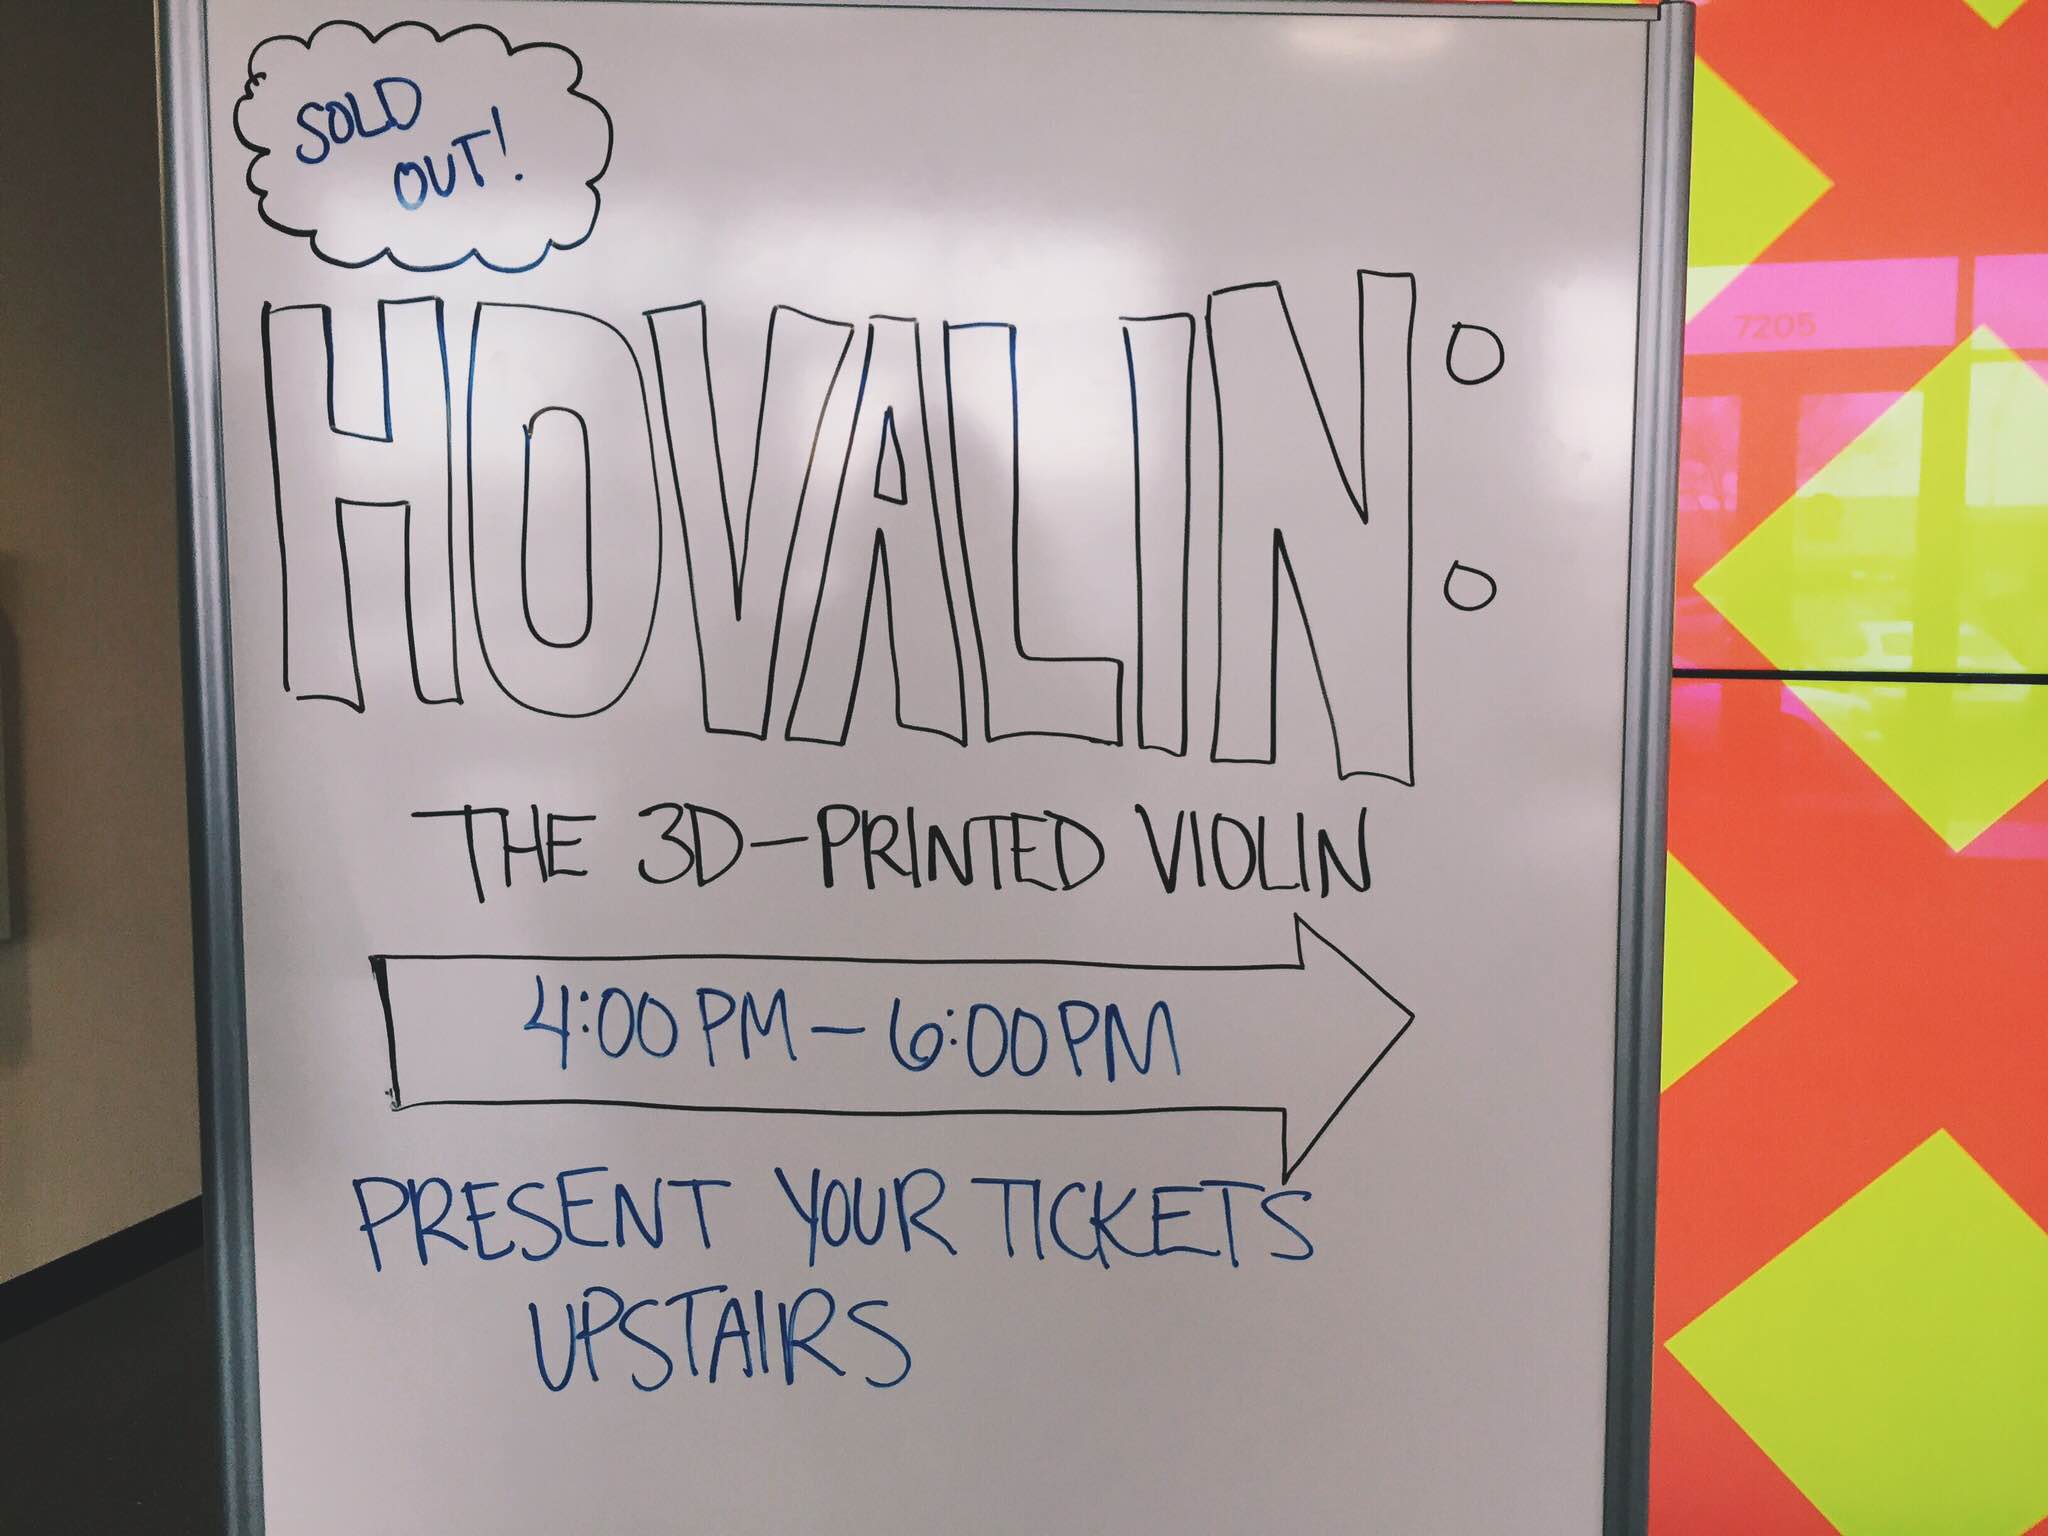 Hovalin Sign sold out